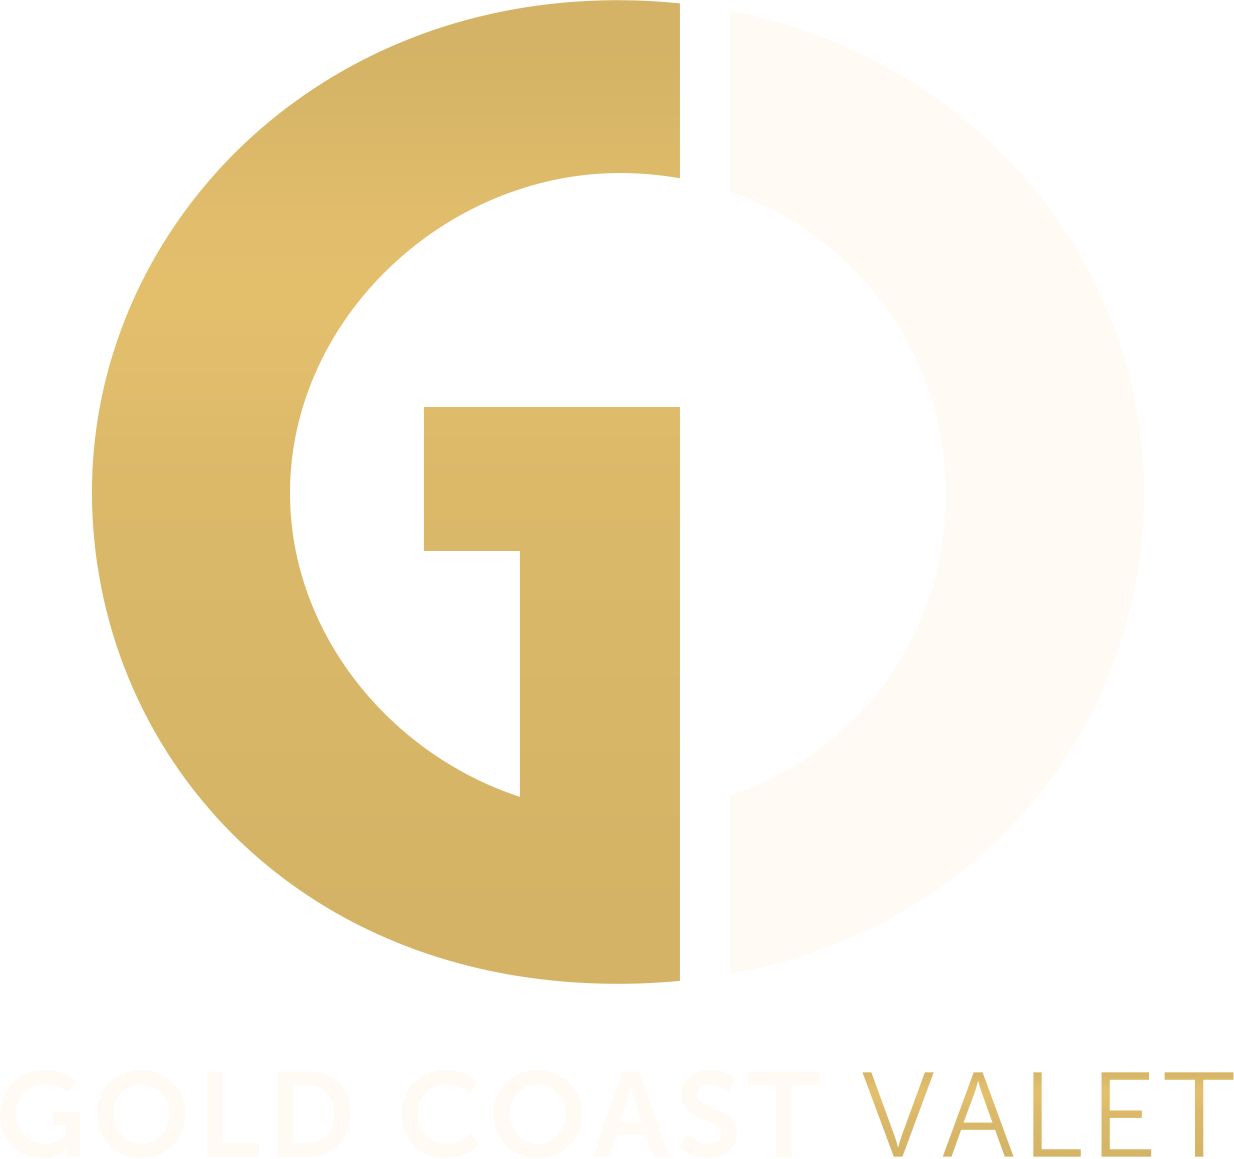 Gold Coast Valet is the premiere hospitality company of Long Island, NY serving restaurants, hotels, residential complexes, healthcare facilities, country clubs, weddings, private parties and more